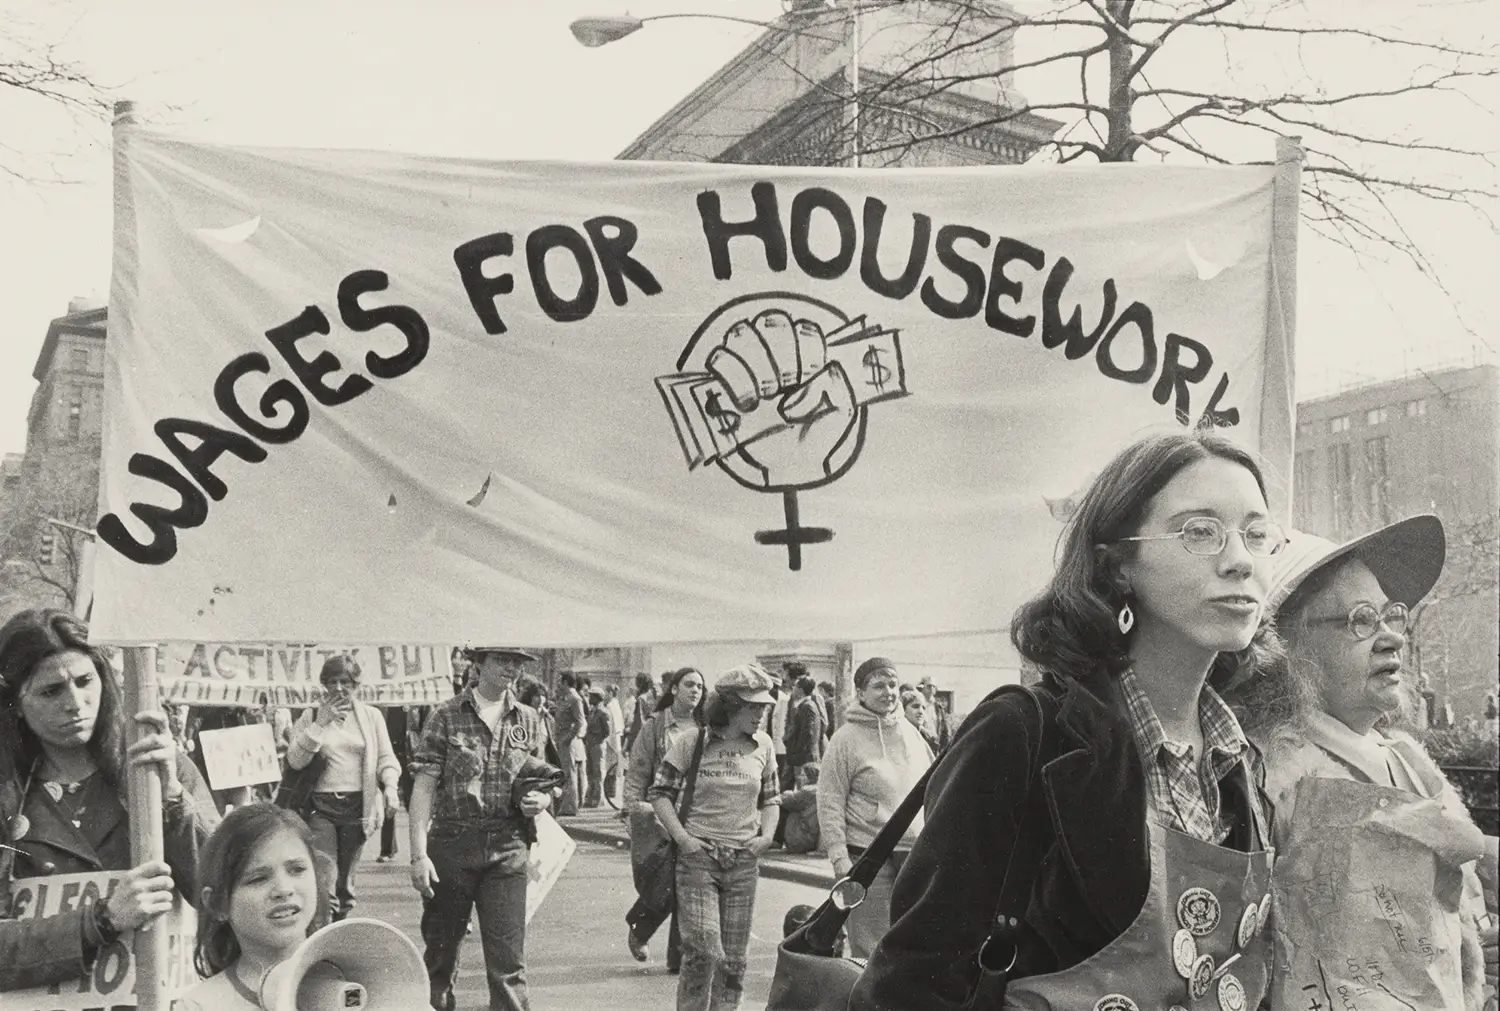 A group of protesters, primarily girls and women, marching with a banner that says “Wages for housework.”